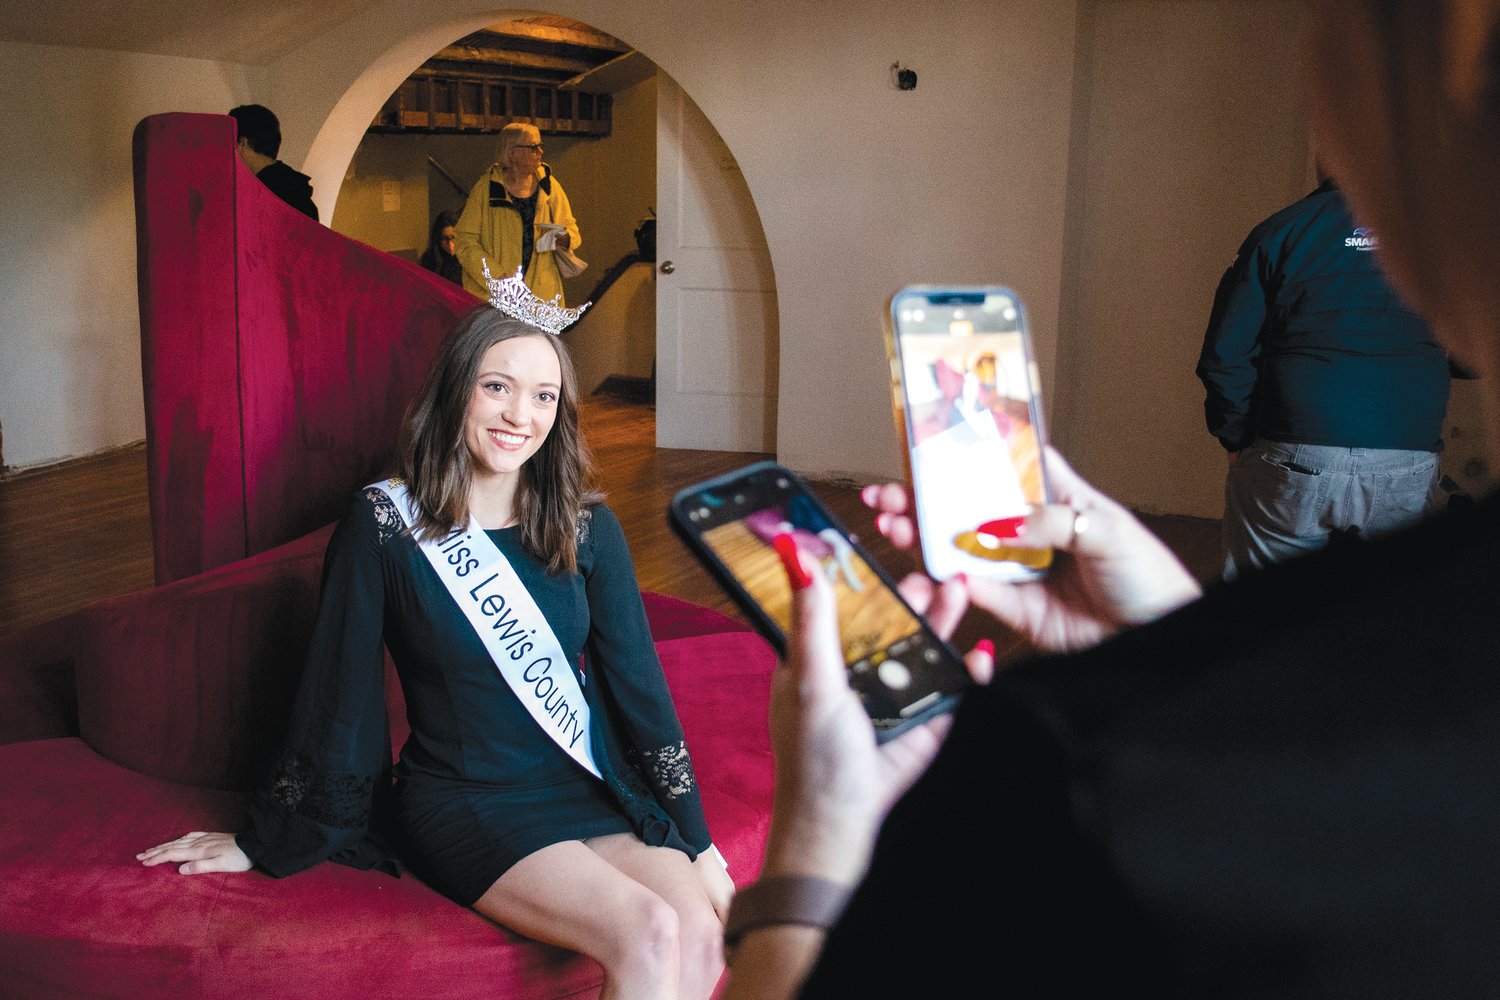 Miss Lewis County Briana Rasku poses for photos on a decorative couch during a Centralia-Chehalis Chamber of Commerce Business After Hours event and open house at the Fox Theater Thursday in Centralia.